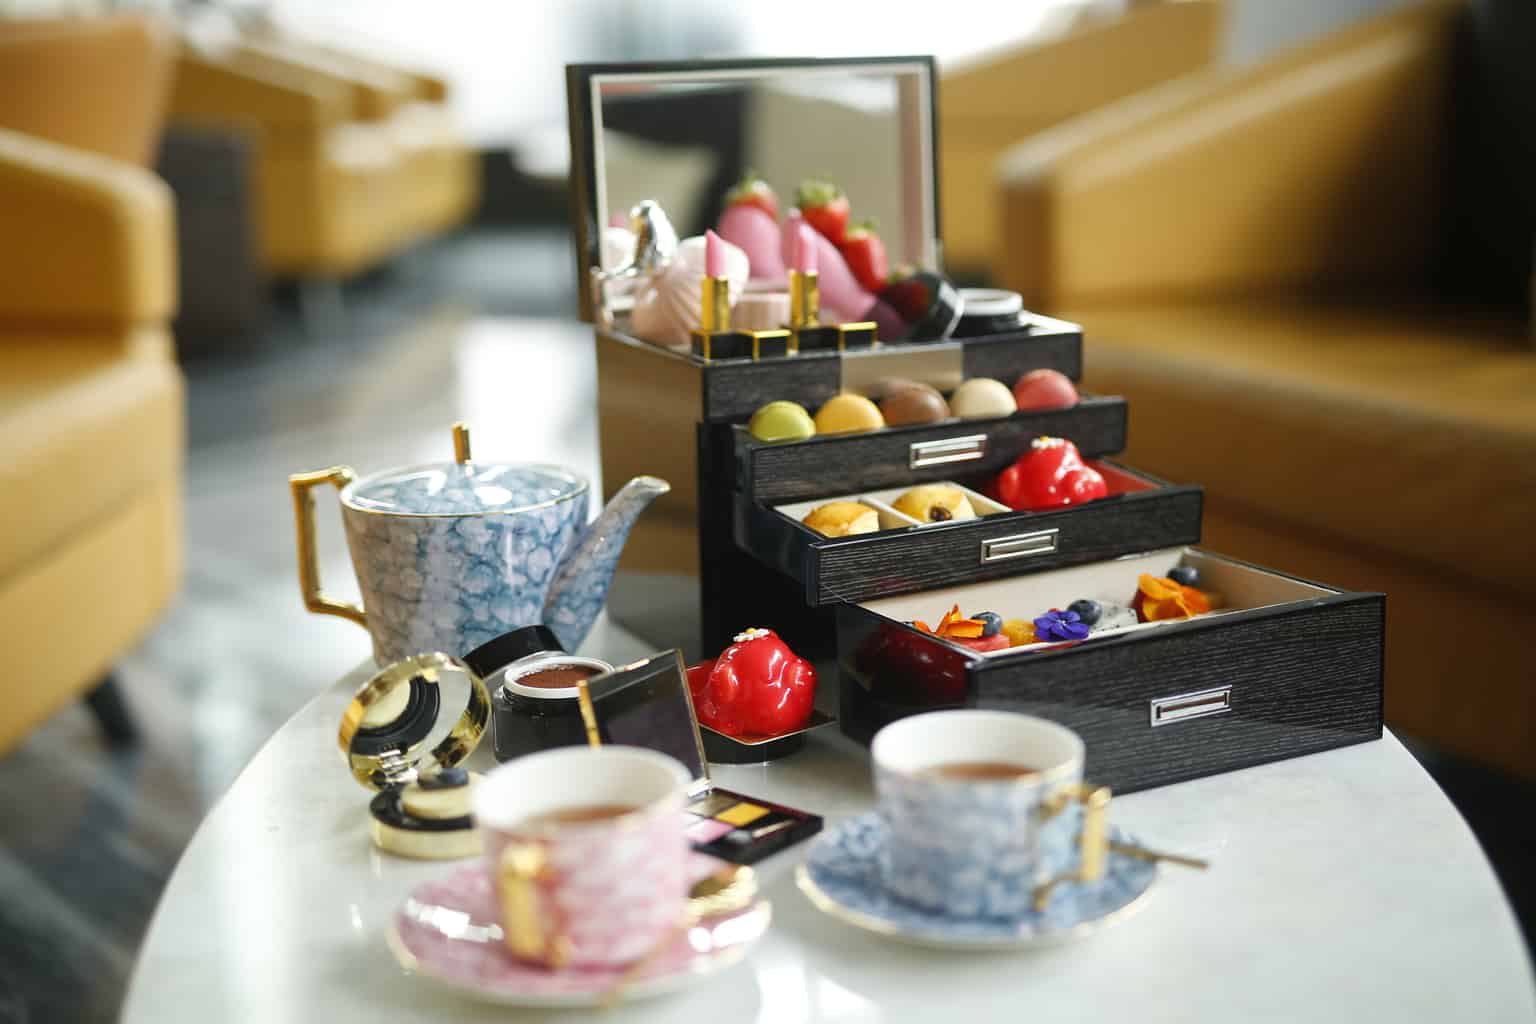 Featured image for “Make-Up Afternoon Tea at the Wyndham Grand”